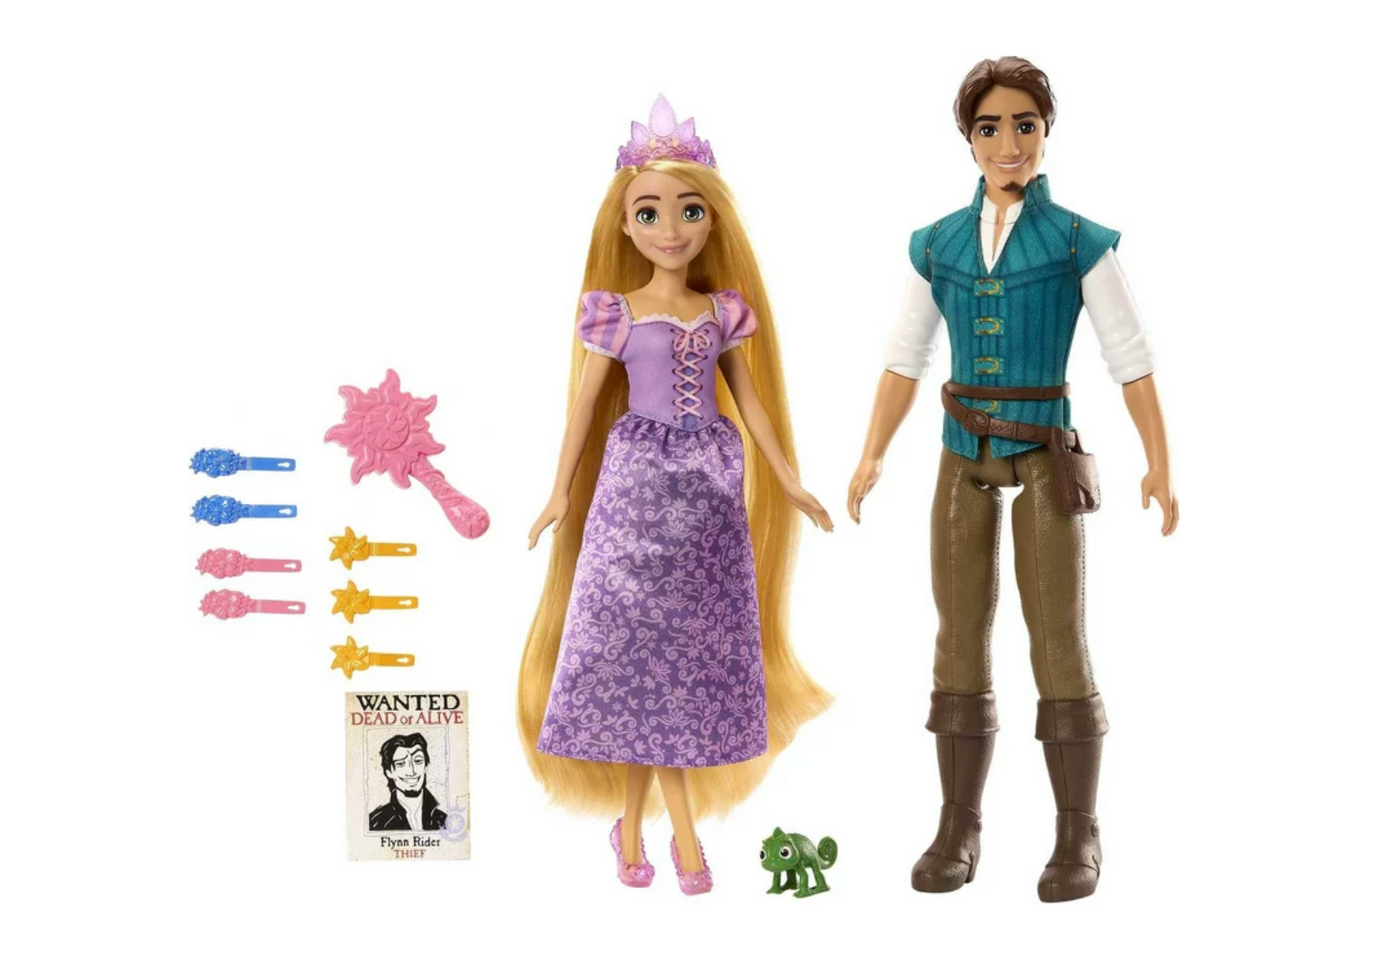 Disney Princess Rapunzel and Flynn Rider Dolls and Accessories Toys Doll New